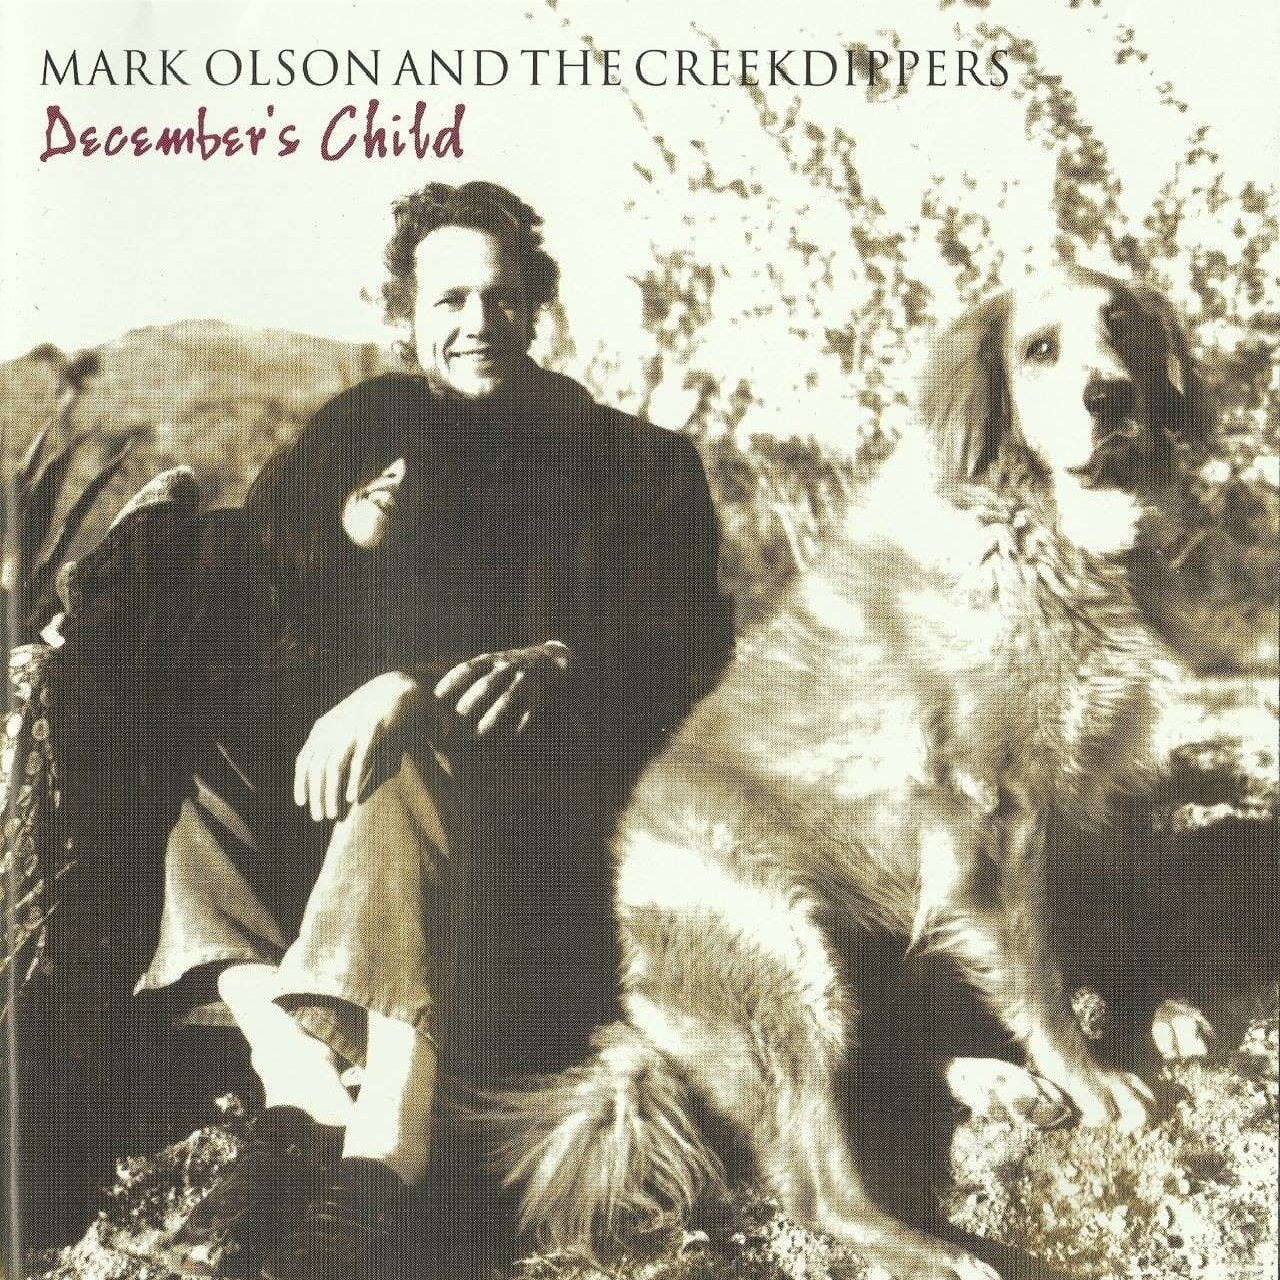 Mark Olson And The Creekdippers – December’s Child cover album